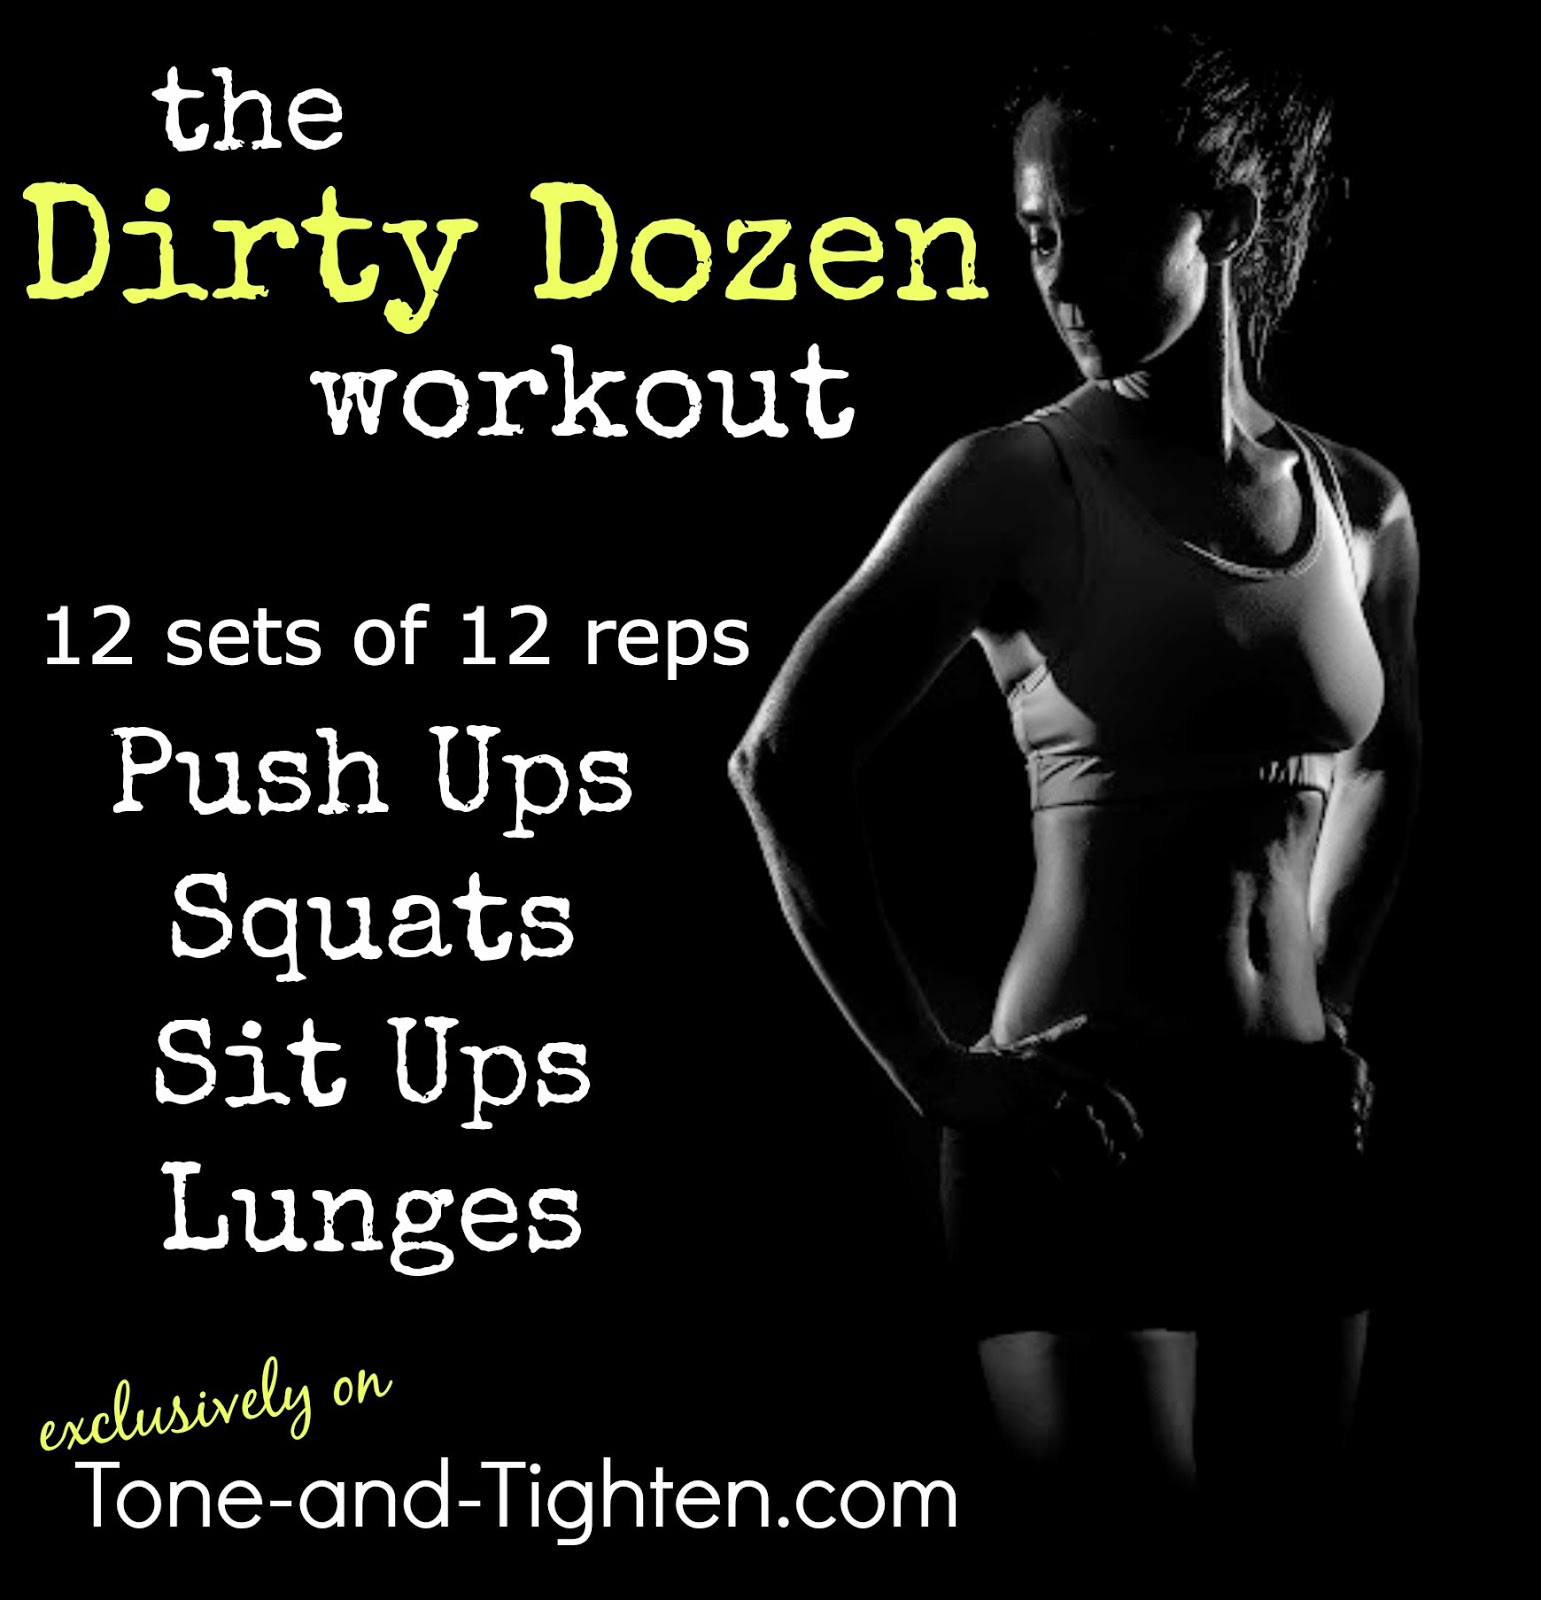 The Dirty Dozen – At Home Total Body Workout from Tone and Tighten!